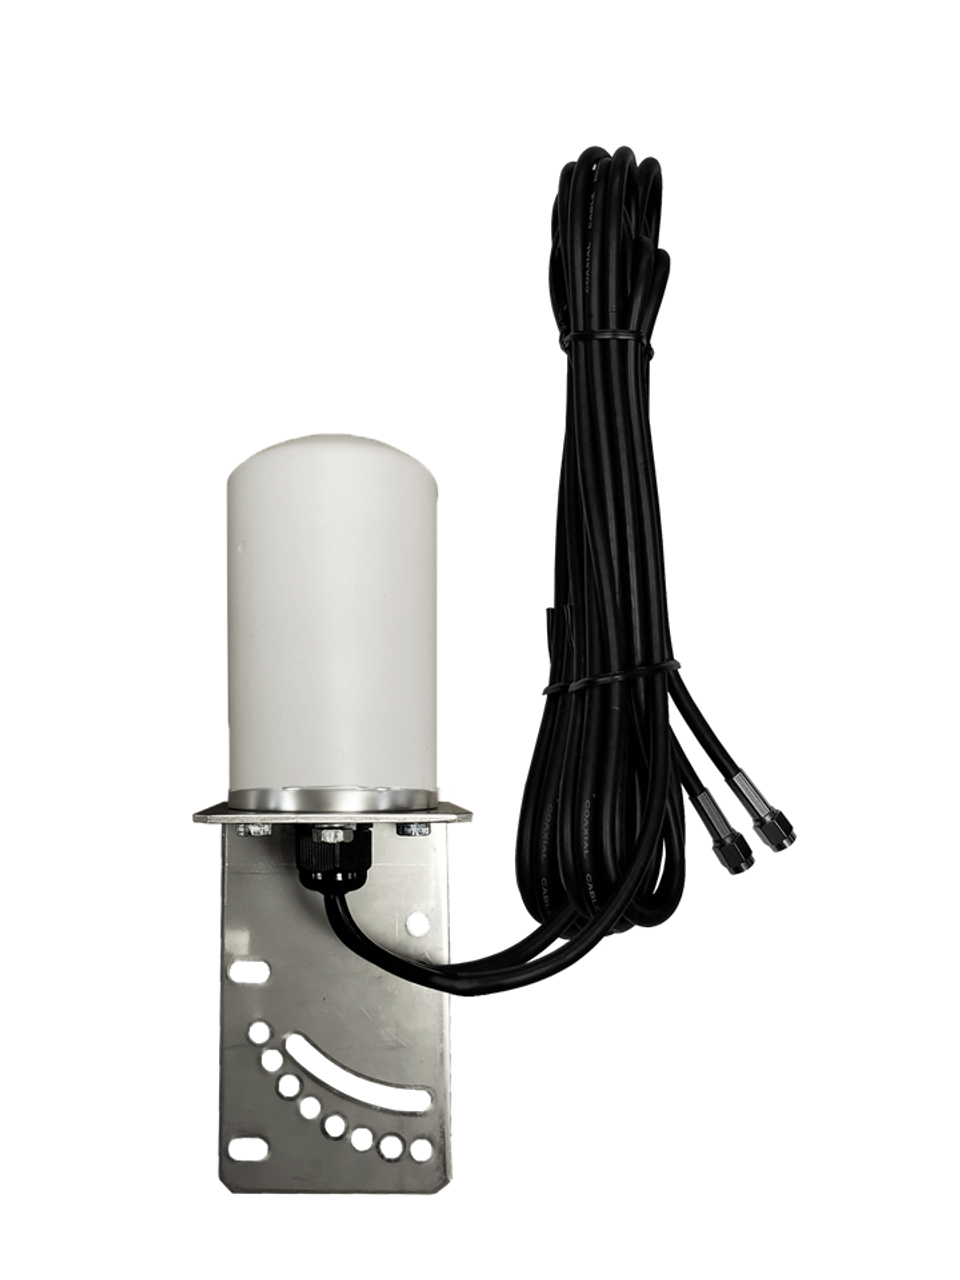 7dBi Omni Directional MIMO Cellular 4G 5G LTE AWS XLTE M2M IoT Antenna for Inseego SKYUS-140 Gateway w/16ft Coax Cables -2  x SMA